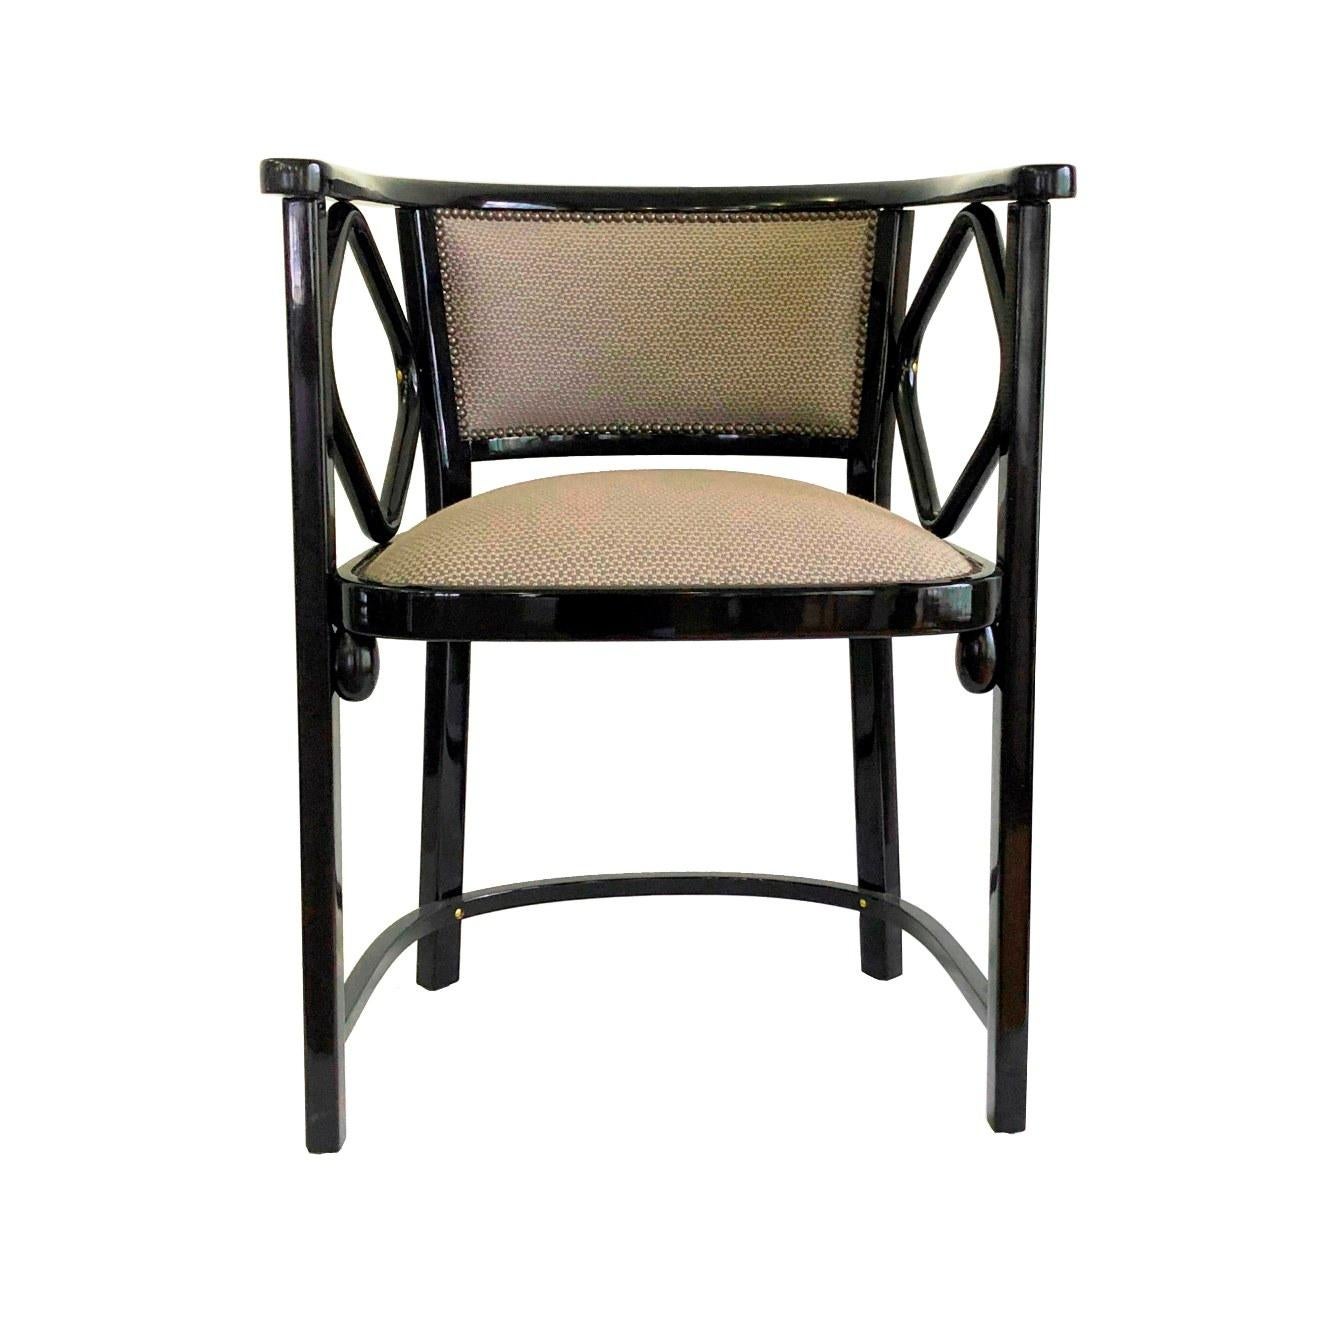 12 Josef Hoffmann Attributed Thonet Bentwood Fledermaus Chairs, Austria, 1930s For Sale 10